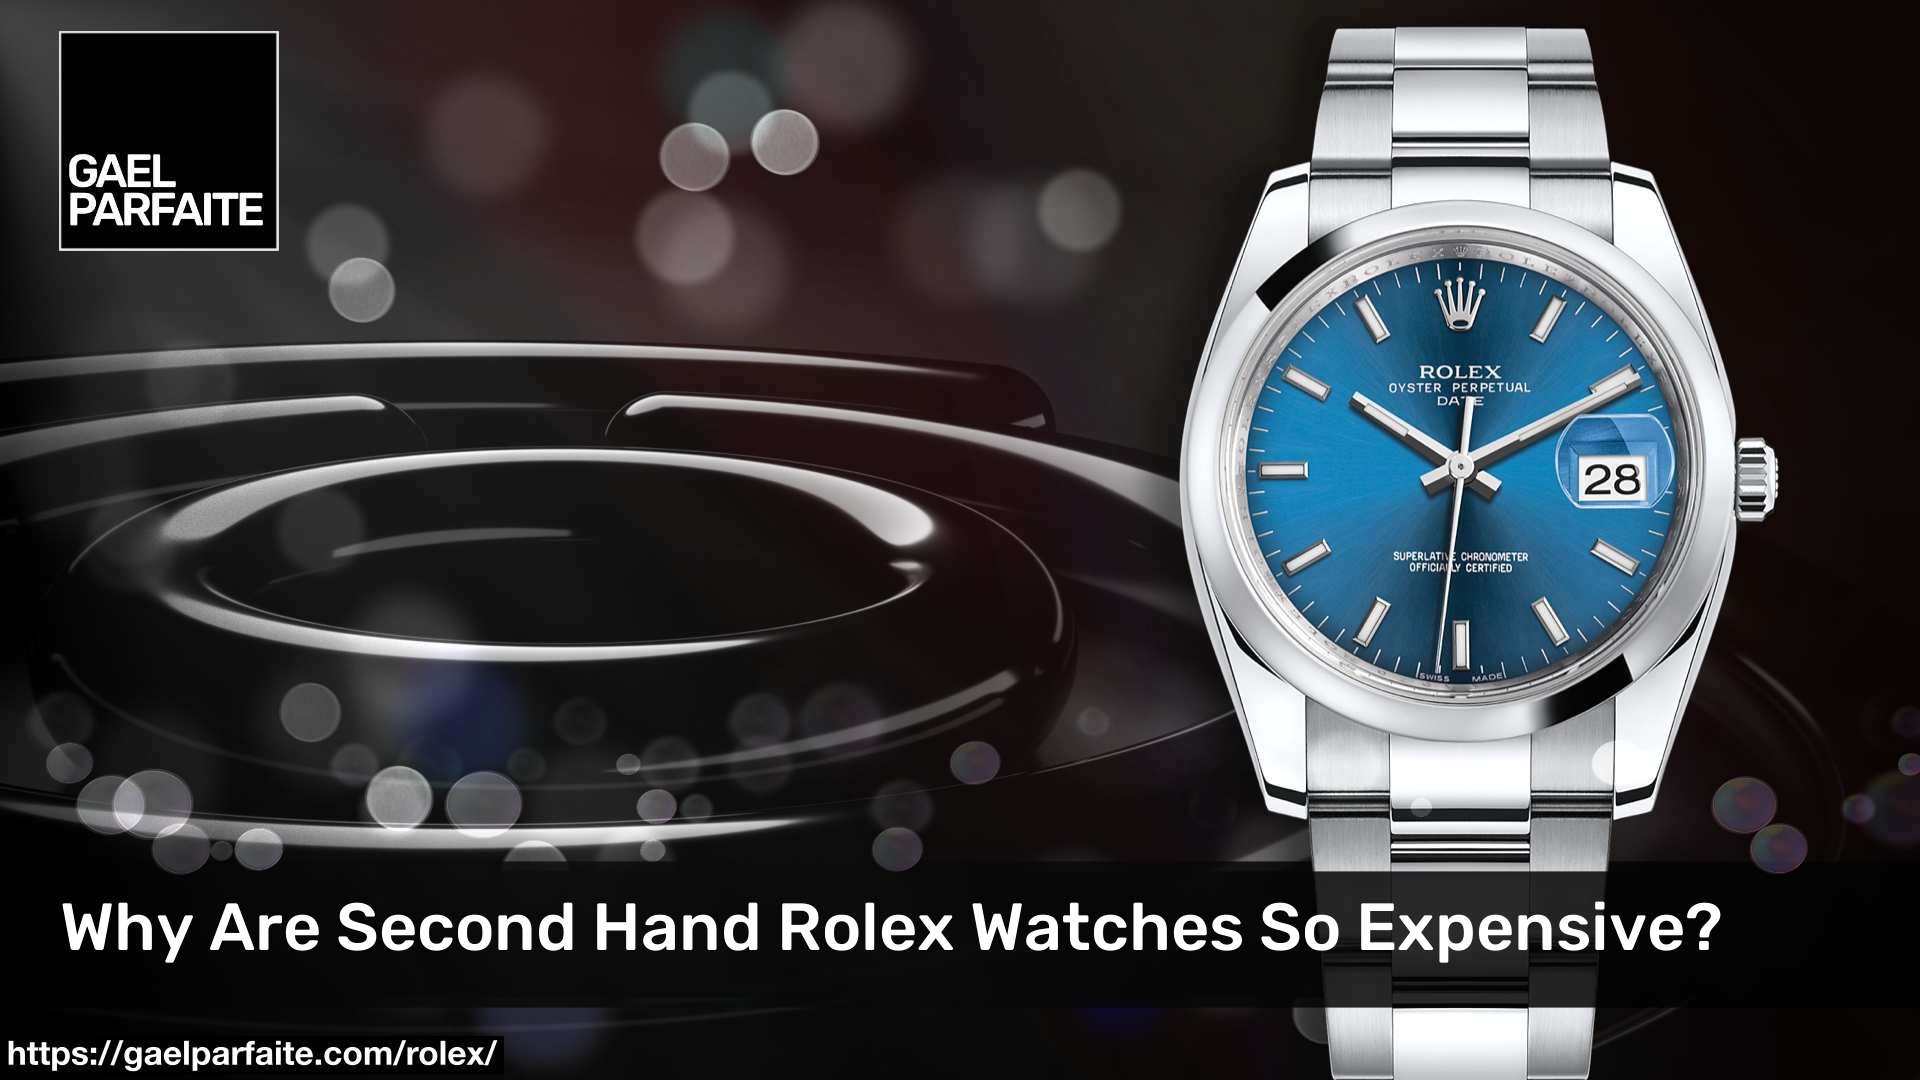 Why Are Second Hand Rolex Watches So Expensive?